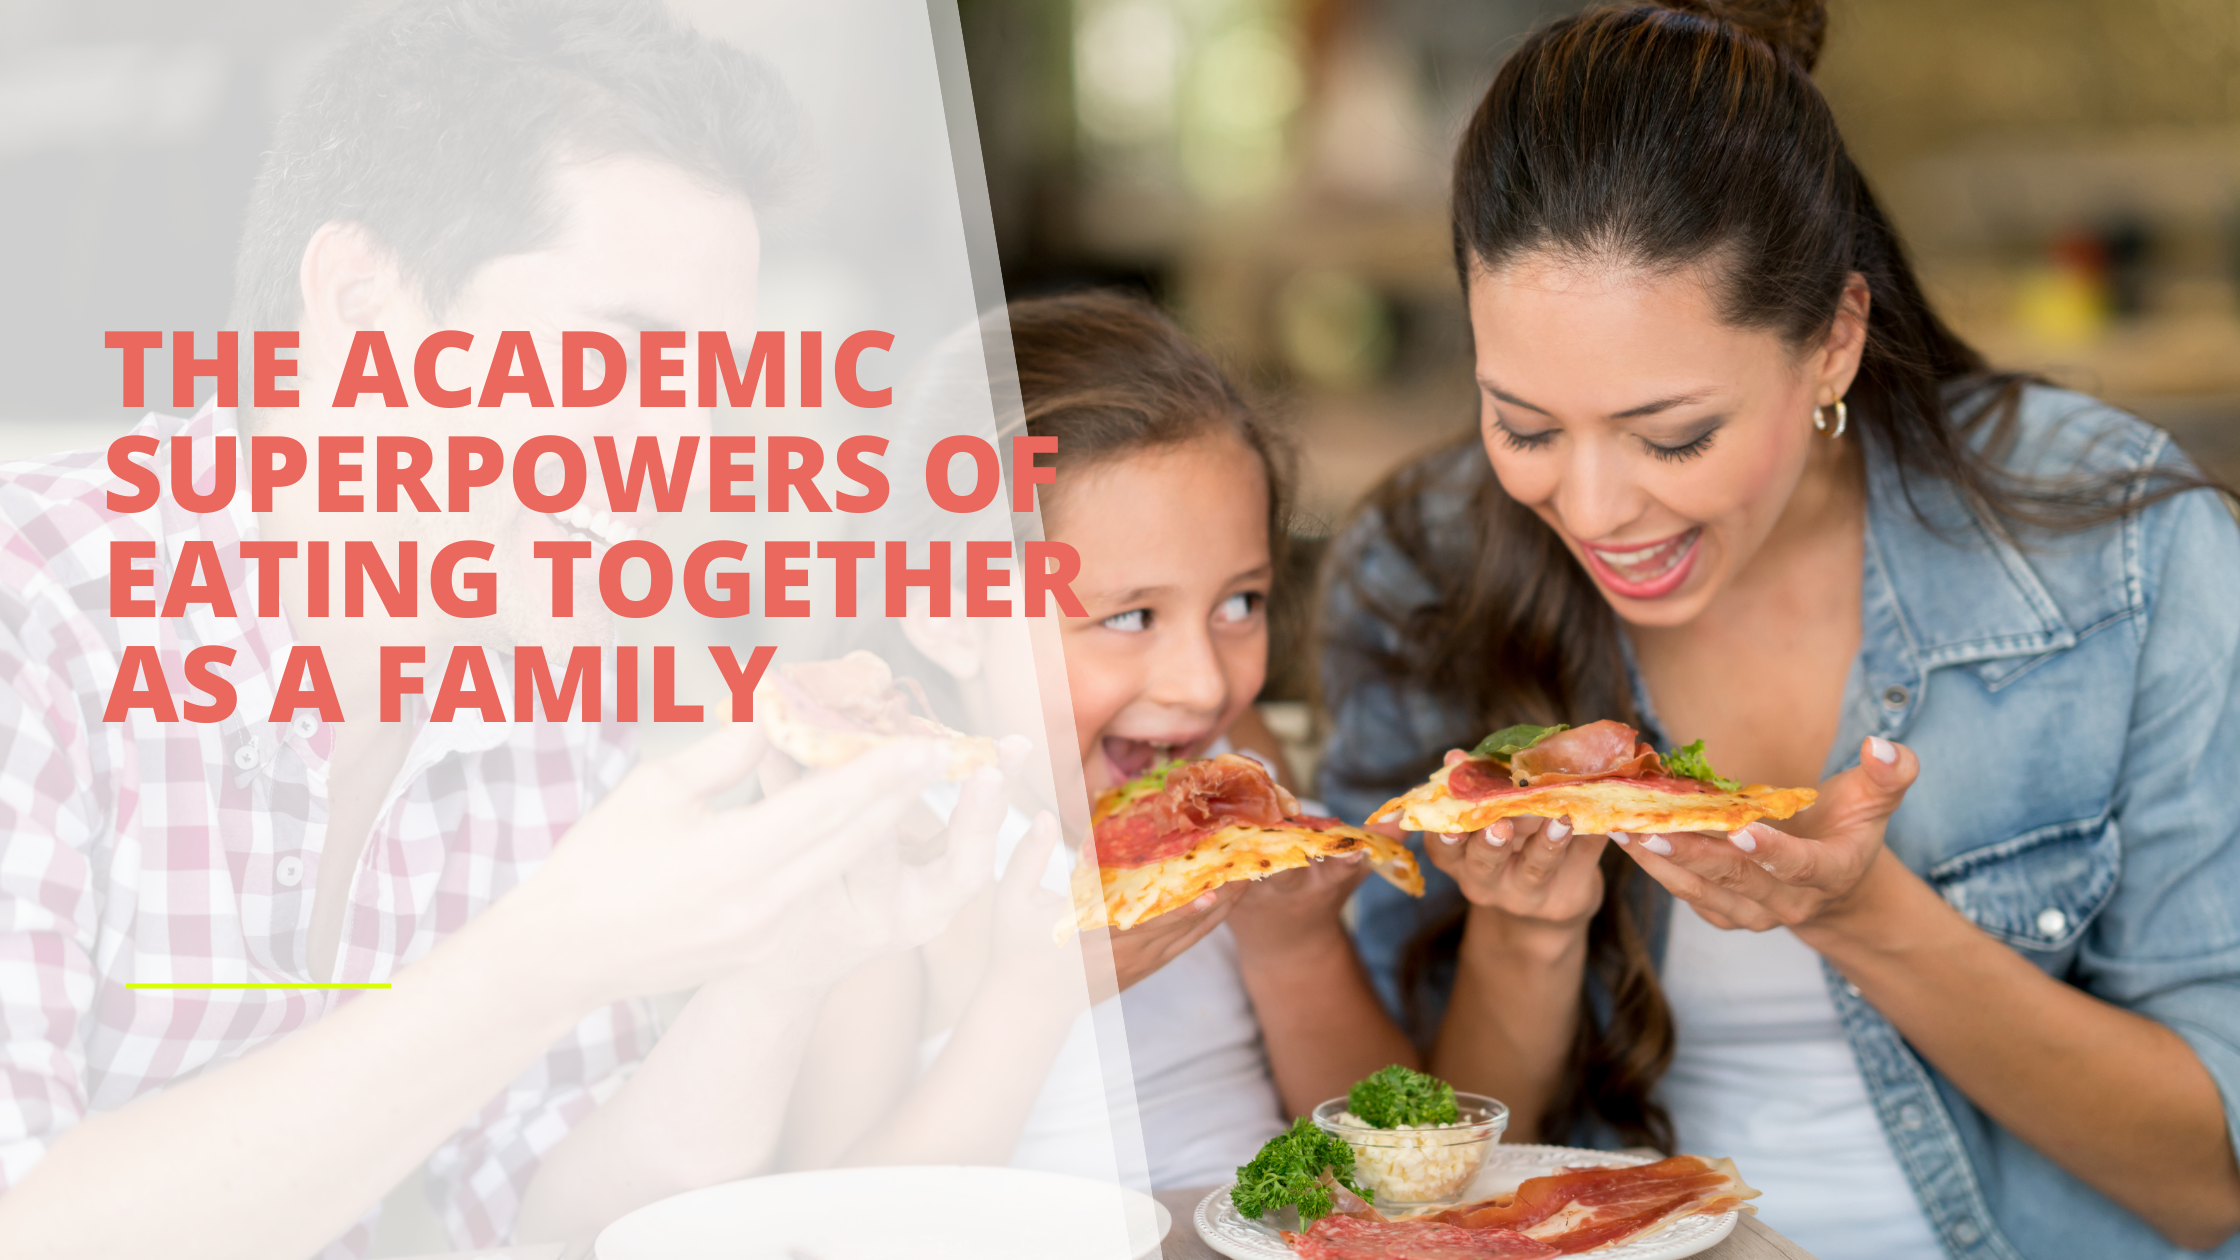 The academic superpowers of eating together as a family